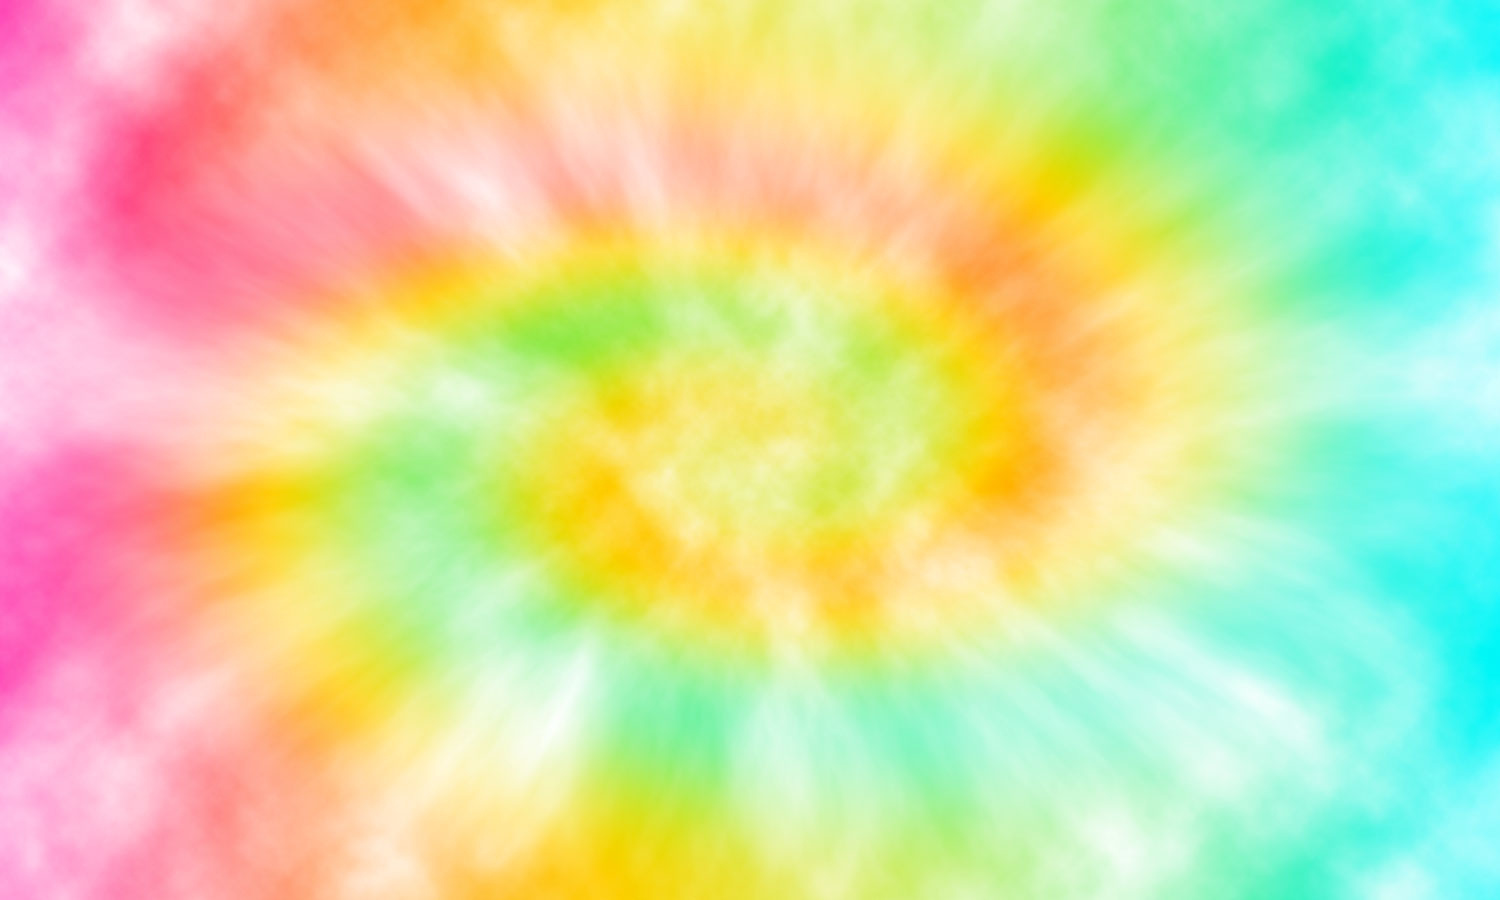 Colorful Tie dye Patterned Background